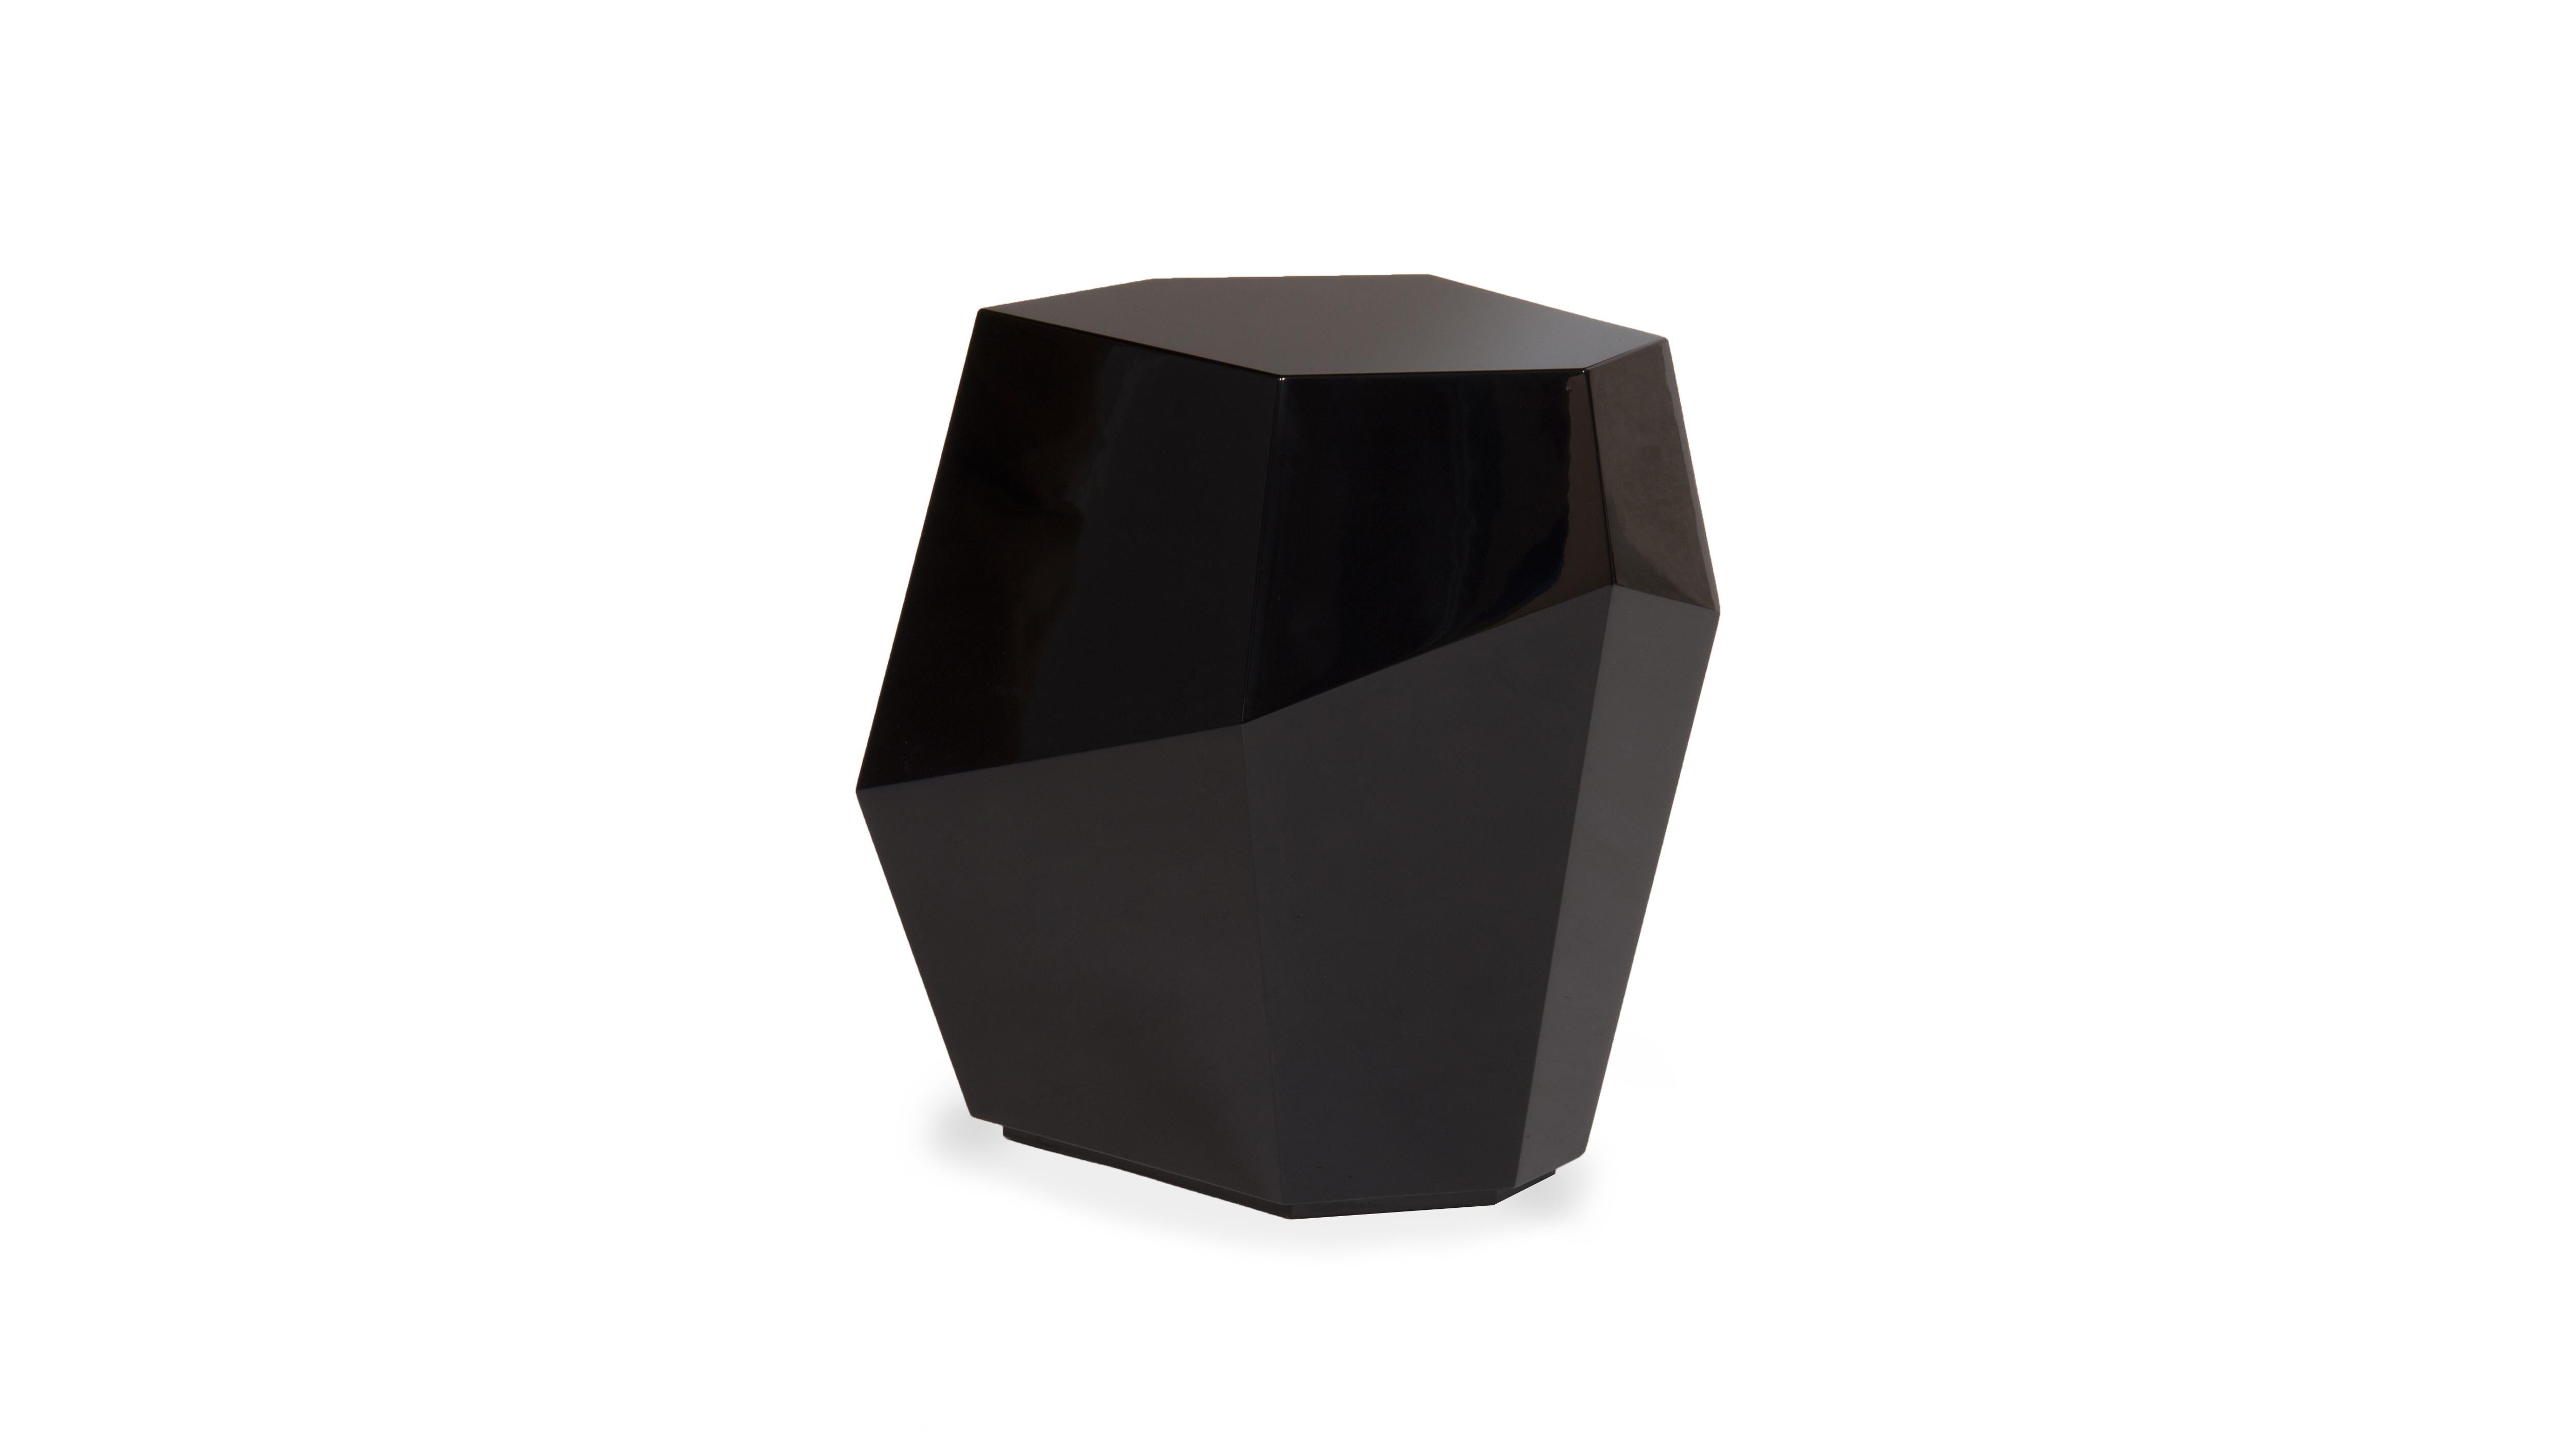 High Three Rocks Black Side Table by InsidherLand
Dimensions: D 40 x W 51 x H 48 cm.
Materials: Black lacquered.
7 kg.
Other materials available.

From The Special Tree, Fallen Leaves on the water reflected the faces of two lovers as mirrors, while